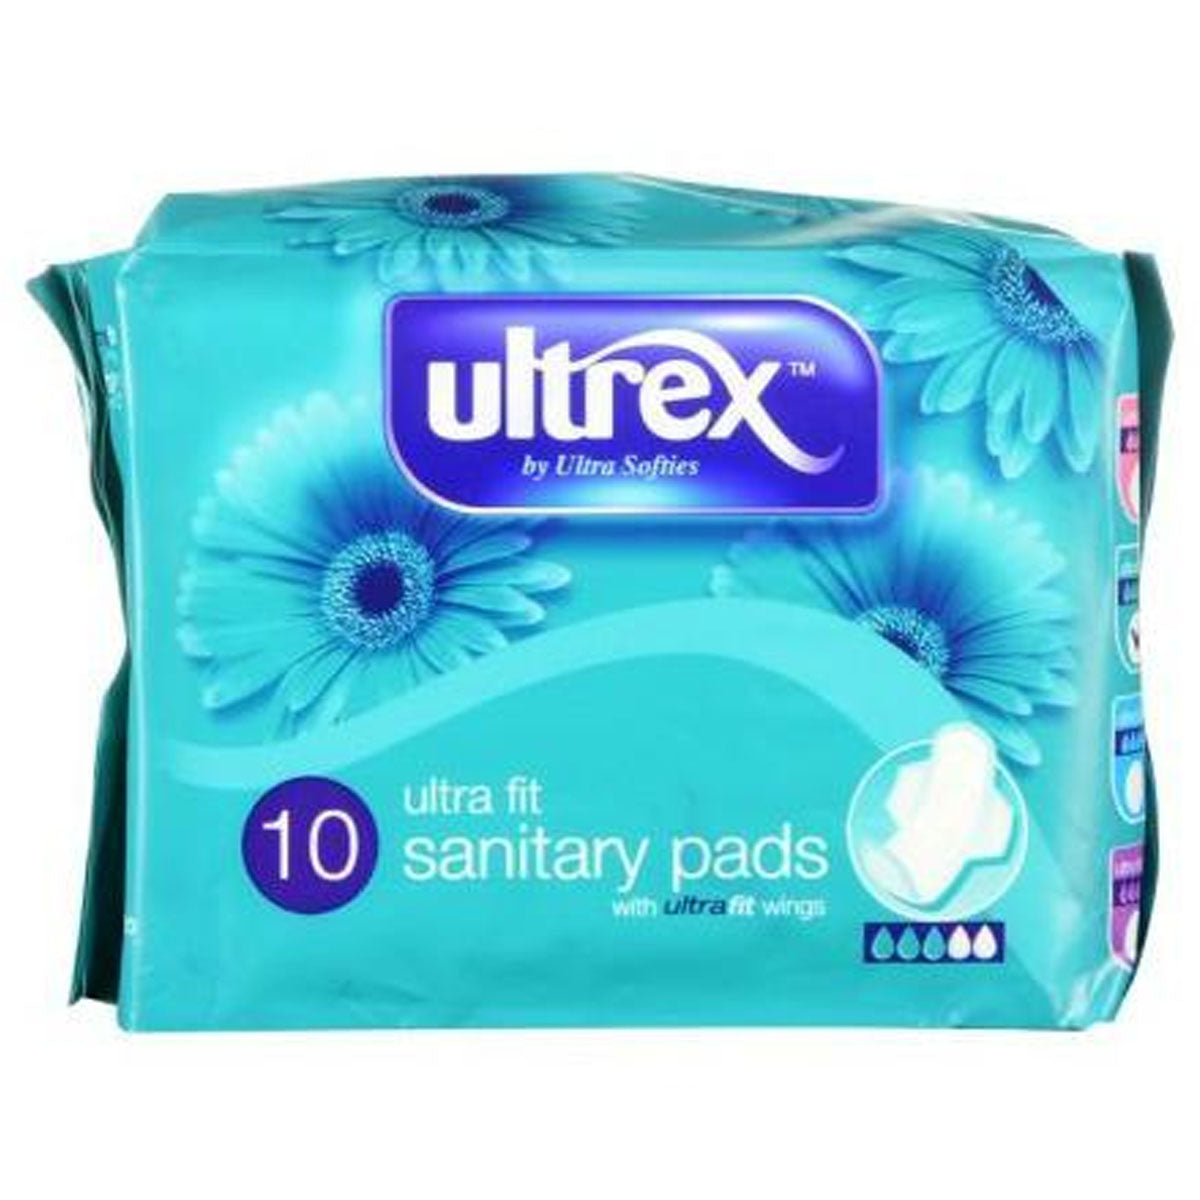 Ultrex - 10 Ultra Fit Sanitary Pads - Continental Food Store